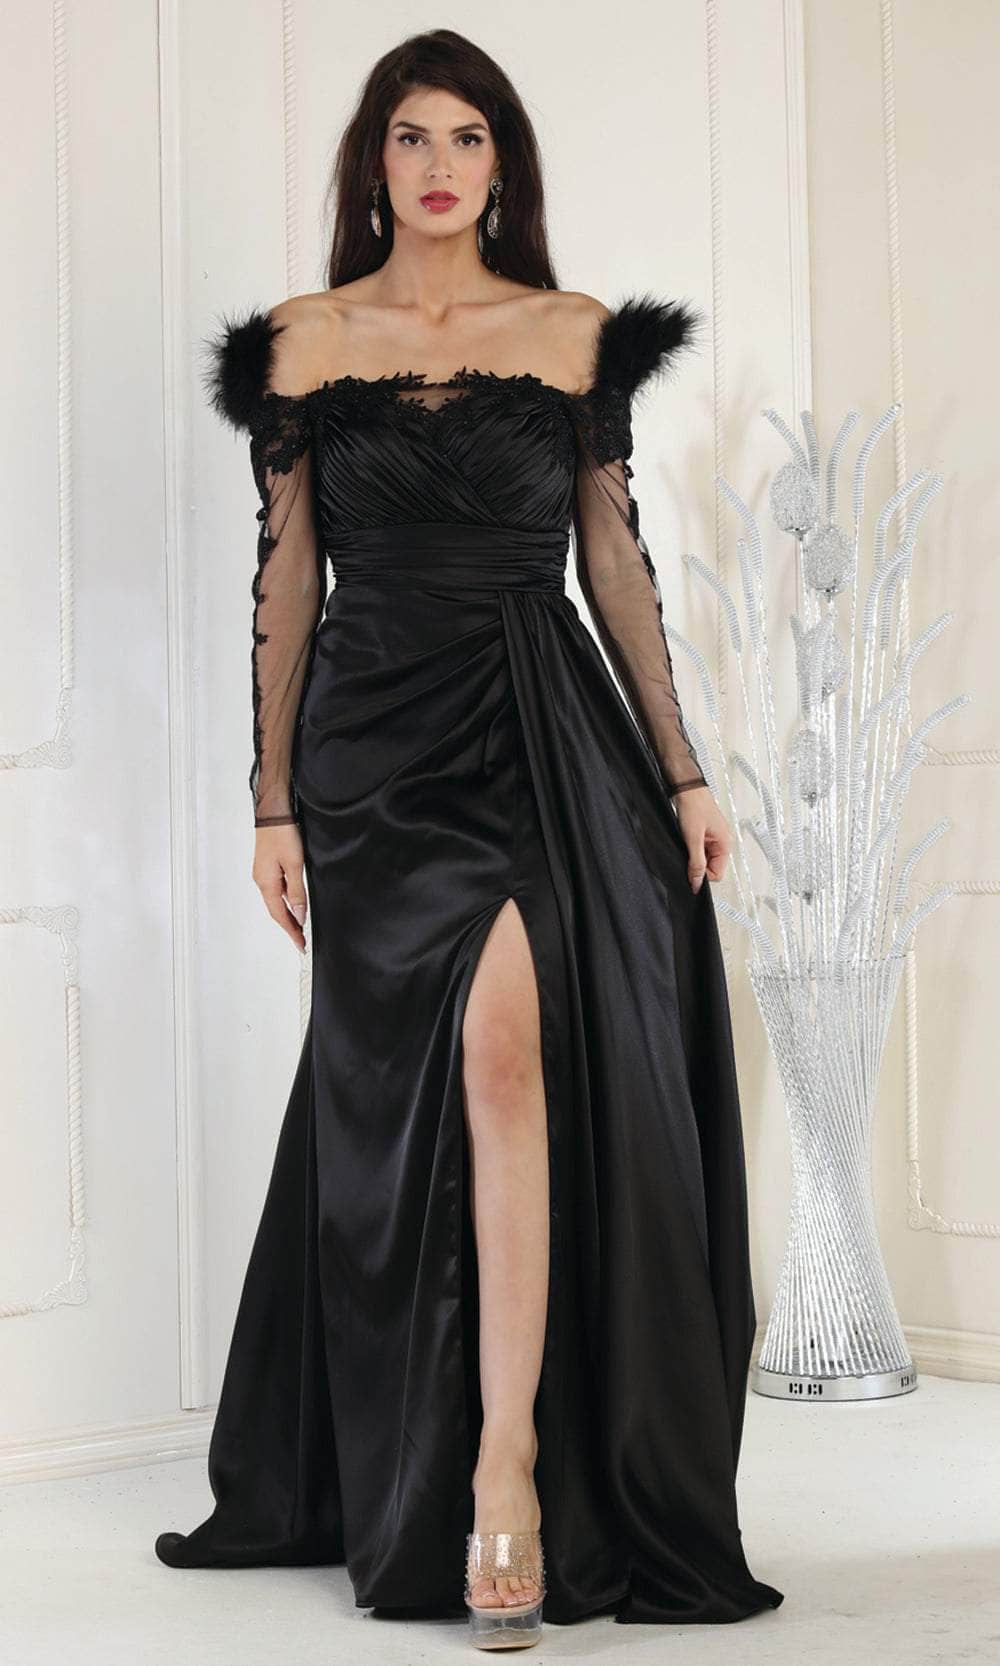 May Queen RQ8002 - Off-Shoulder Feather Detail Evening Dress
